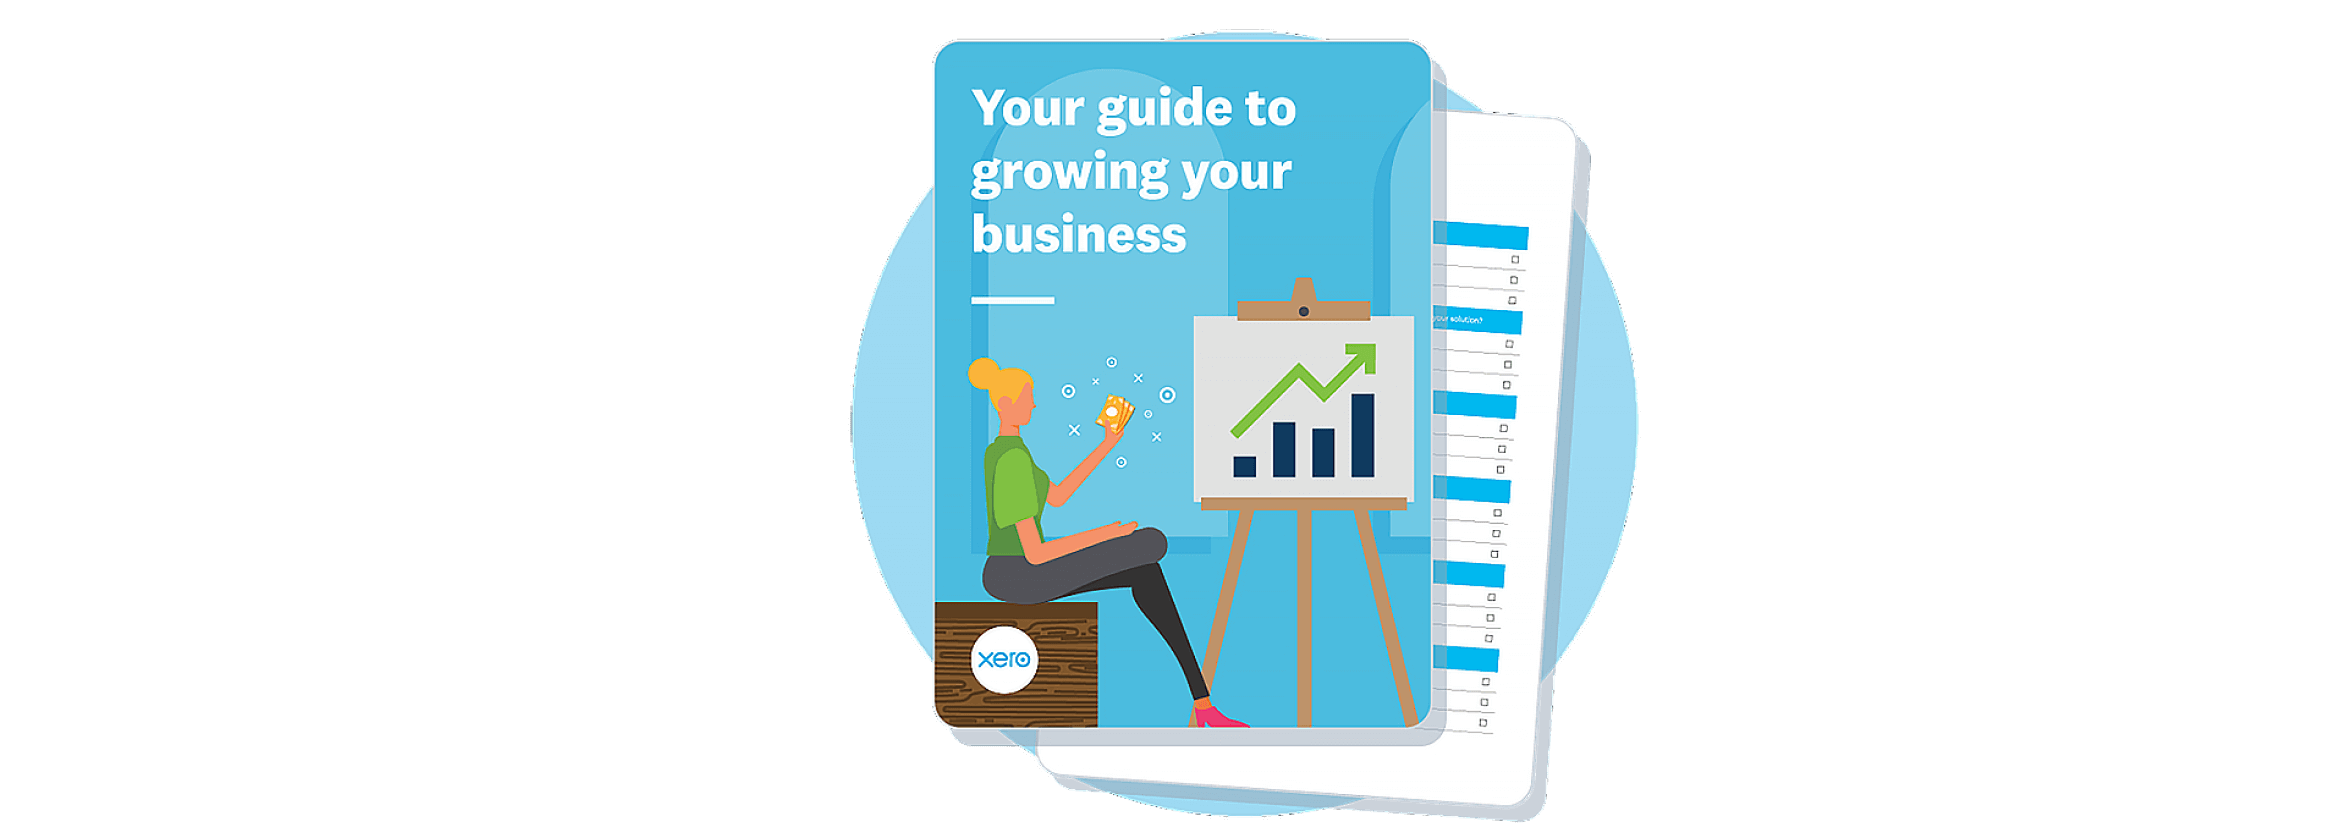 The cover of Xero’s guide to growing your business.